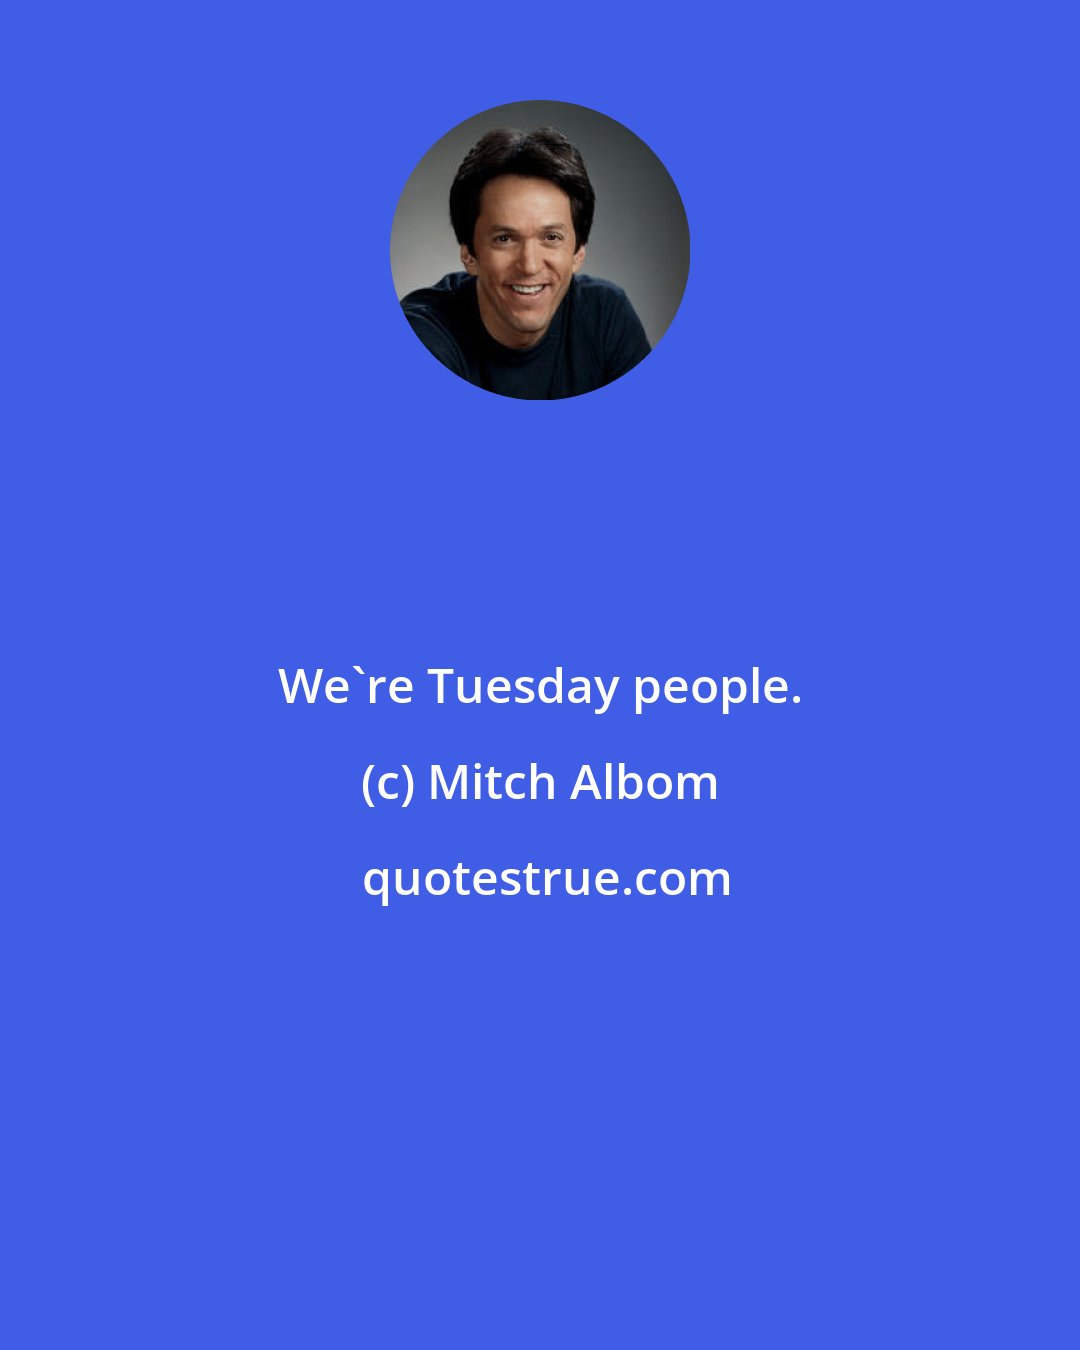 Mitch Albom: We're Tuesday people.